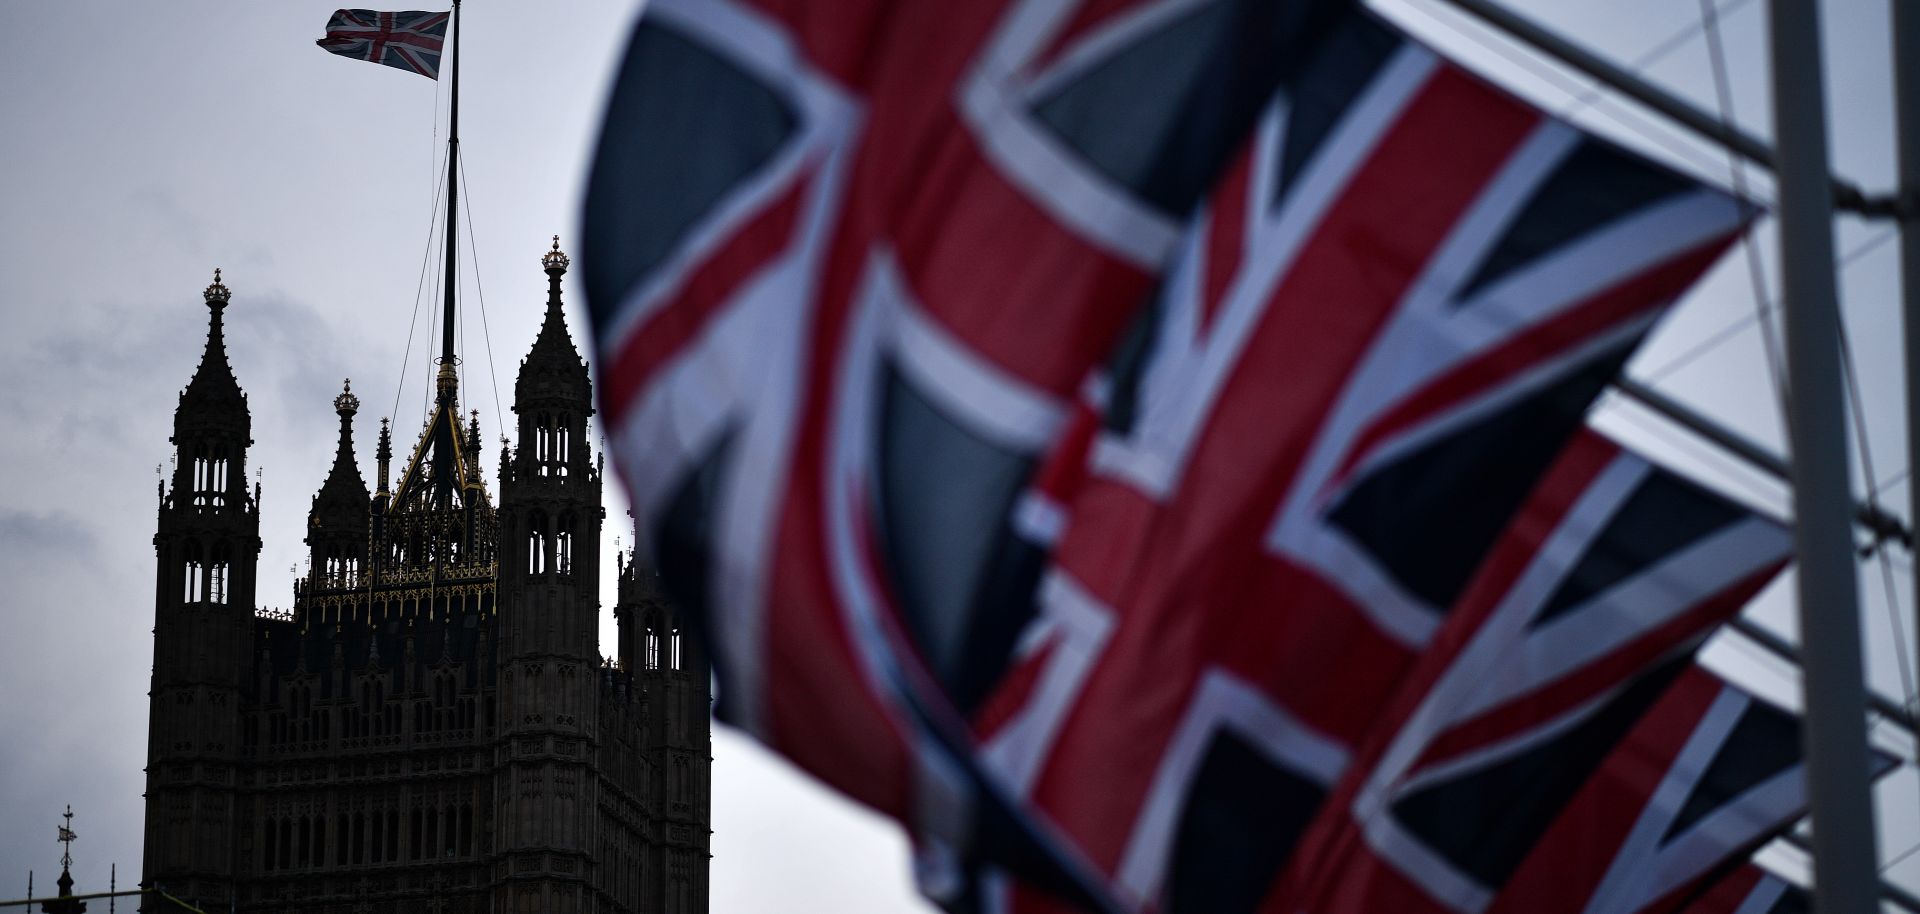 British flags in parliament square on Feb. 1, 2020, in London.